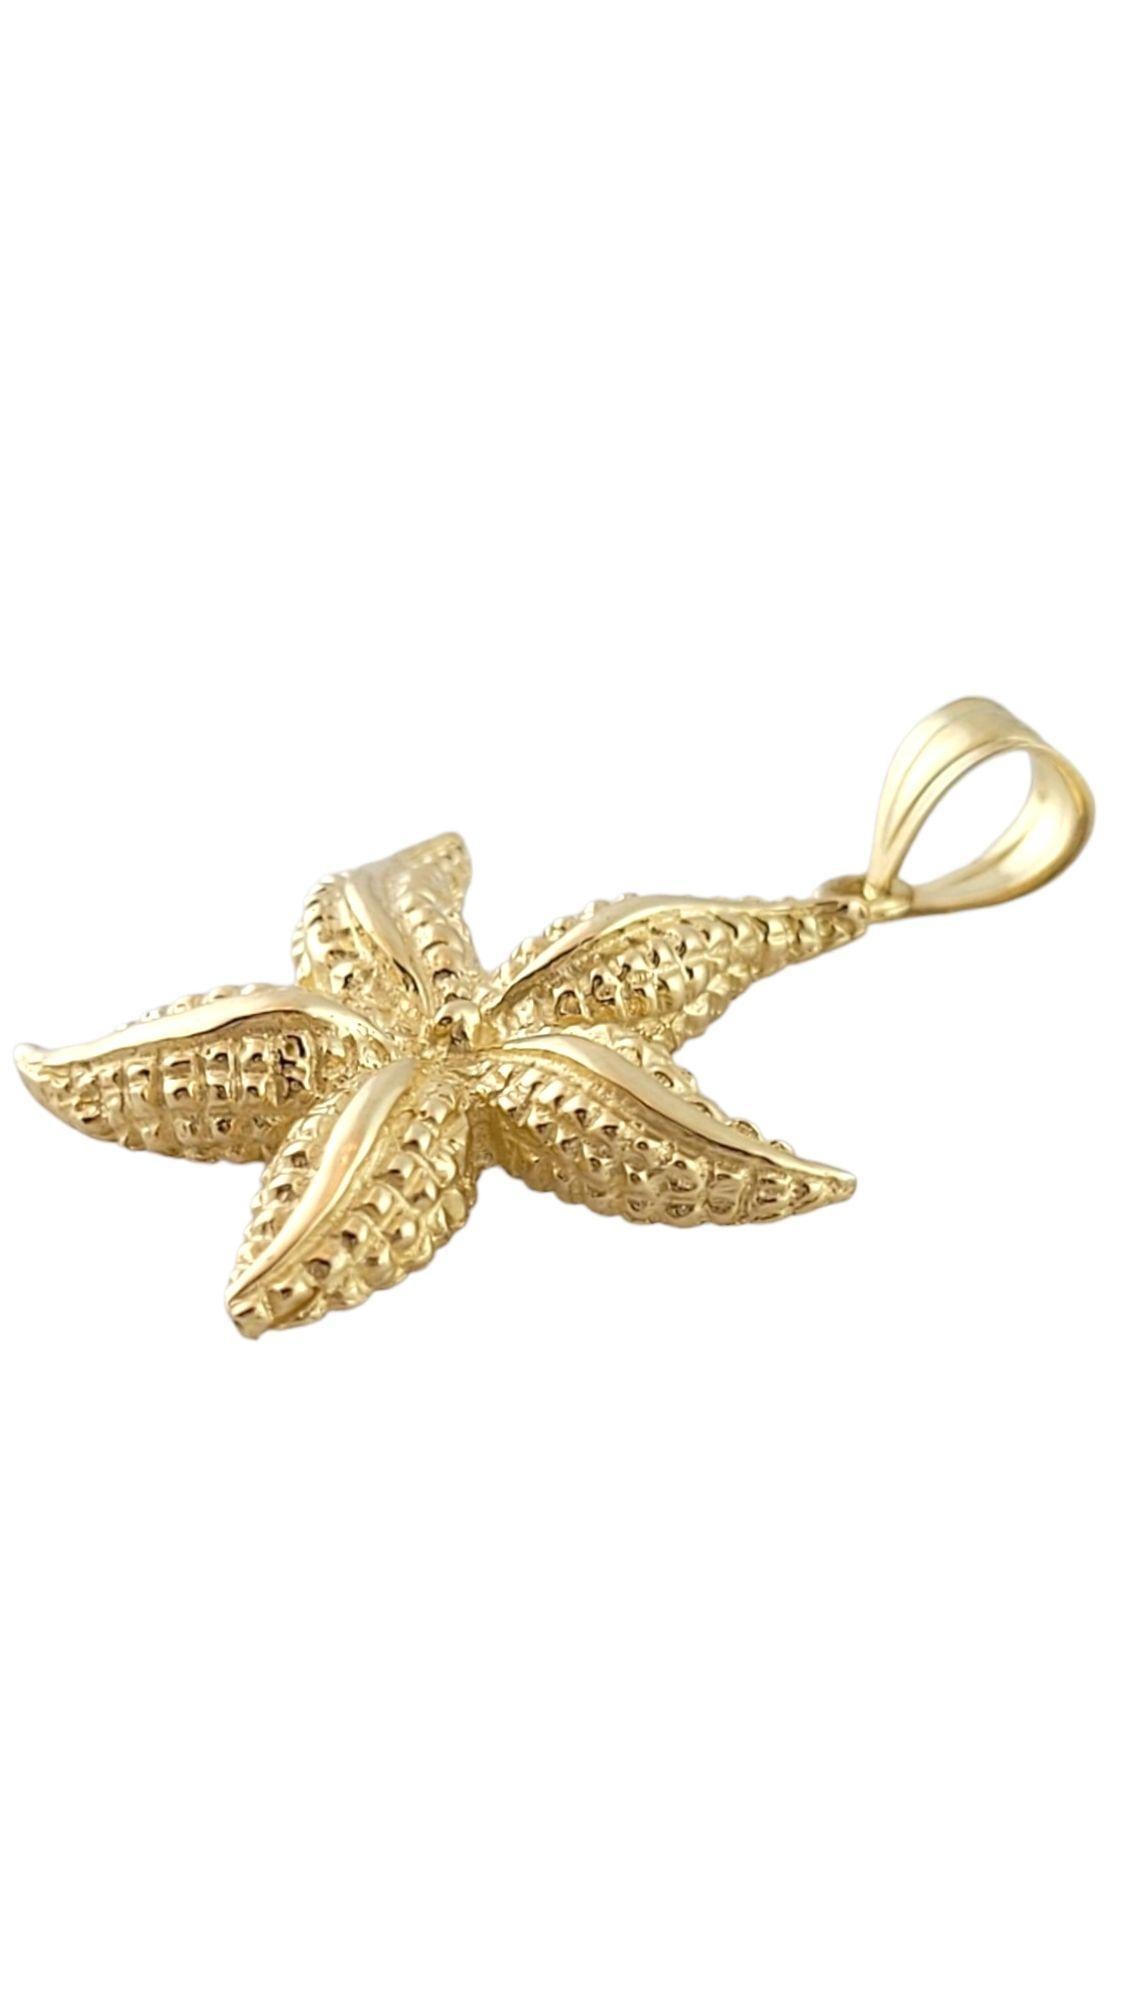 Vintage 14K Yellow Gold Starfish Pendant

This starfish pendant is crafted from 14K yellow gold with beautiful detailing!

Size: 24.3mm X 20.7mm X 3.8mm
Length w/ bail: 30.0mm

Weight: 2.95 g/ 1.9 dwt

Hallmark: 14K

*Chain not included*

Very good